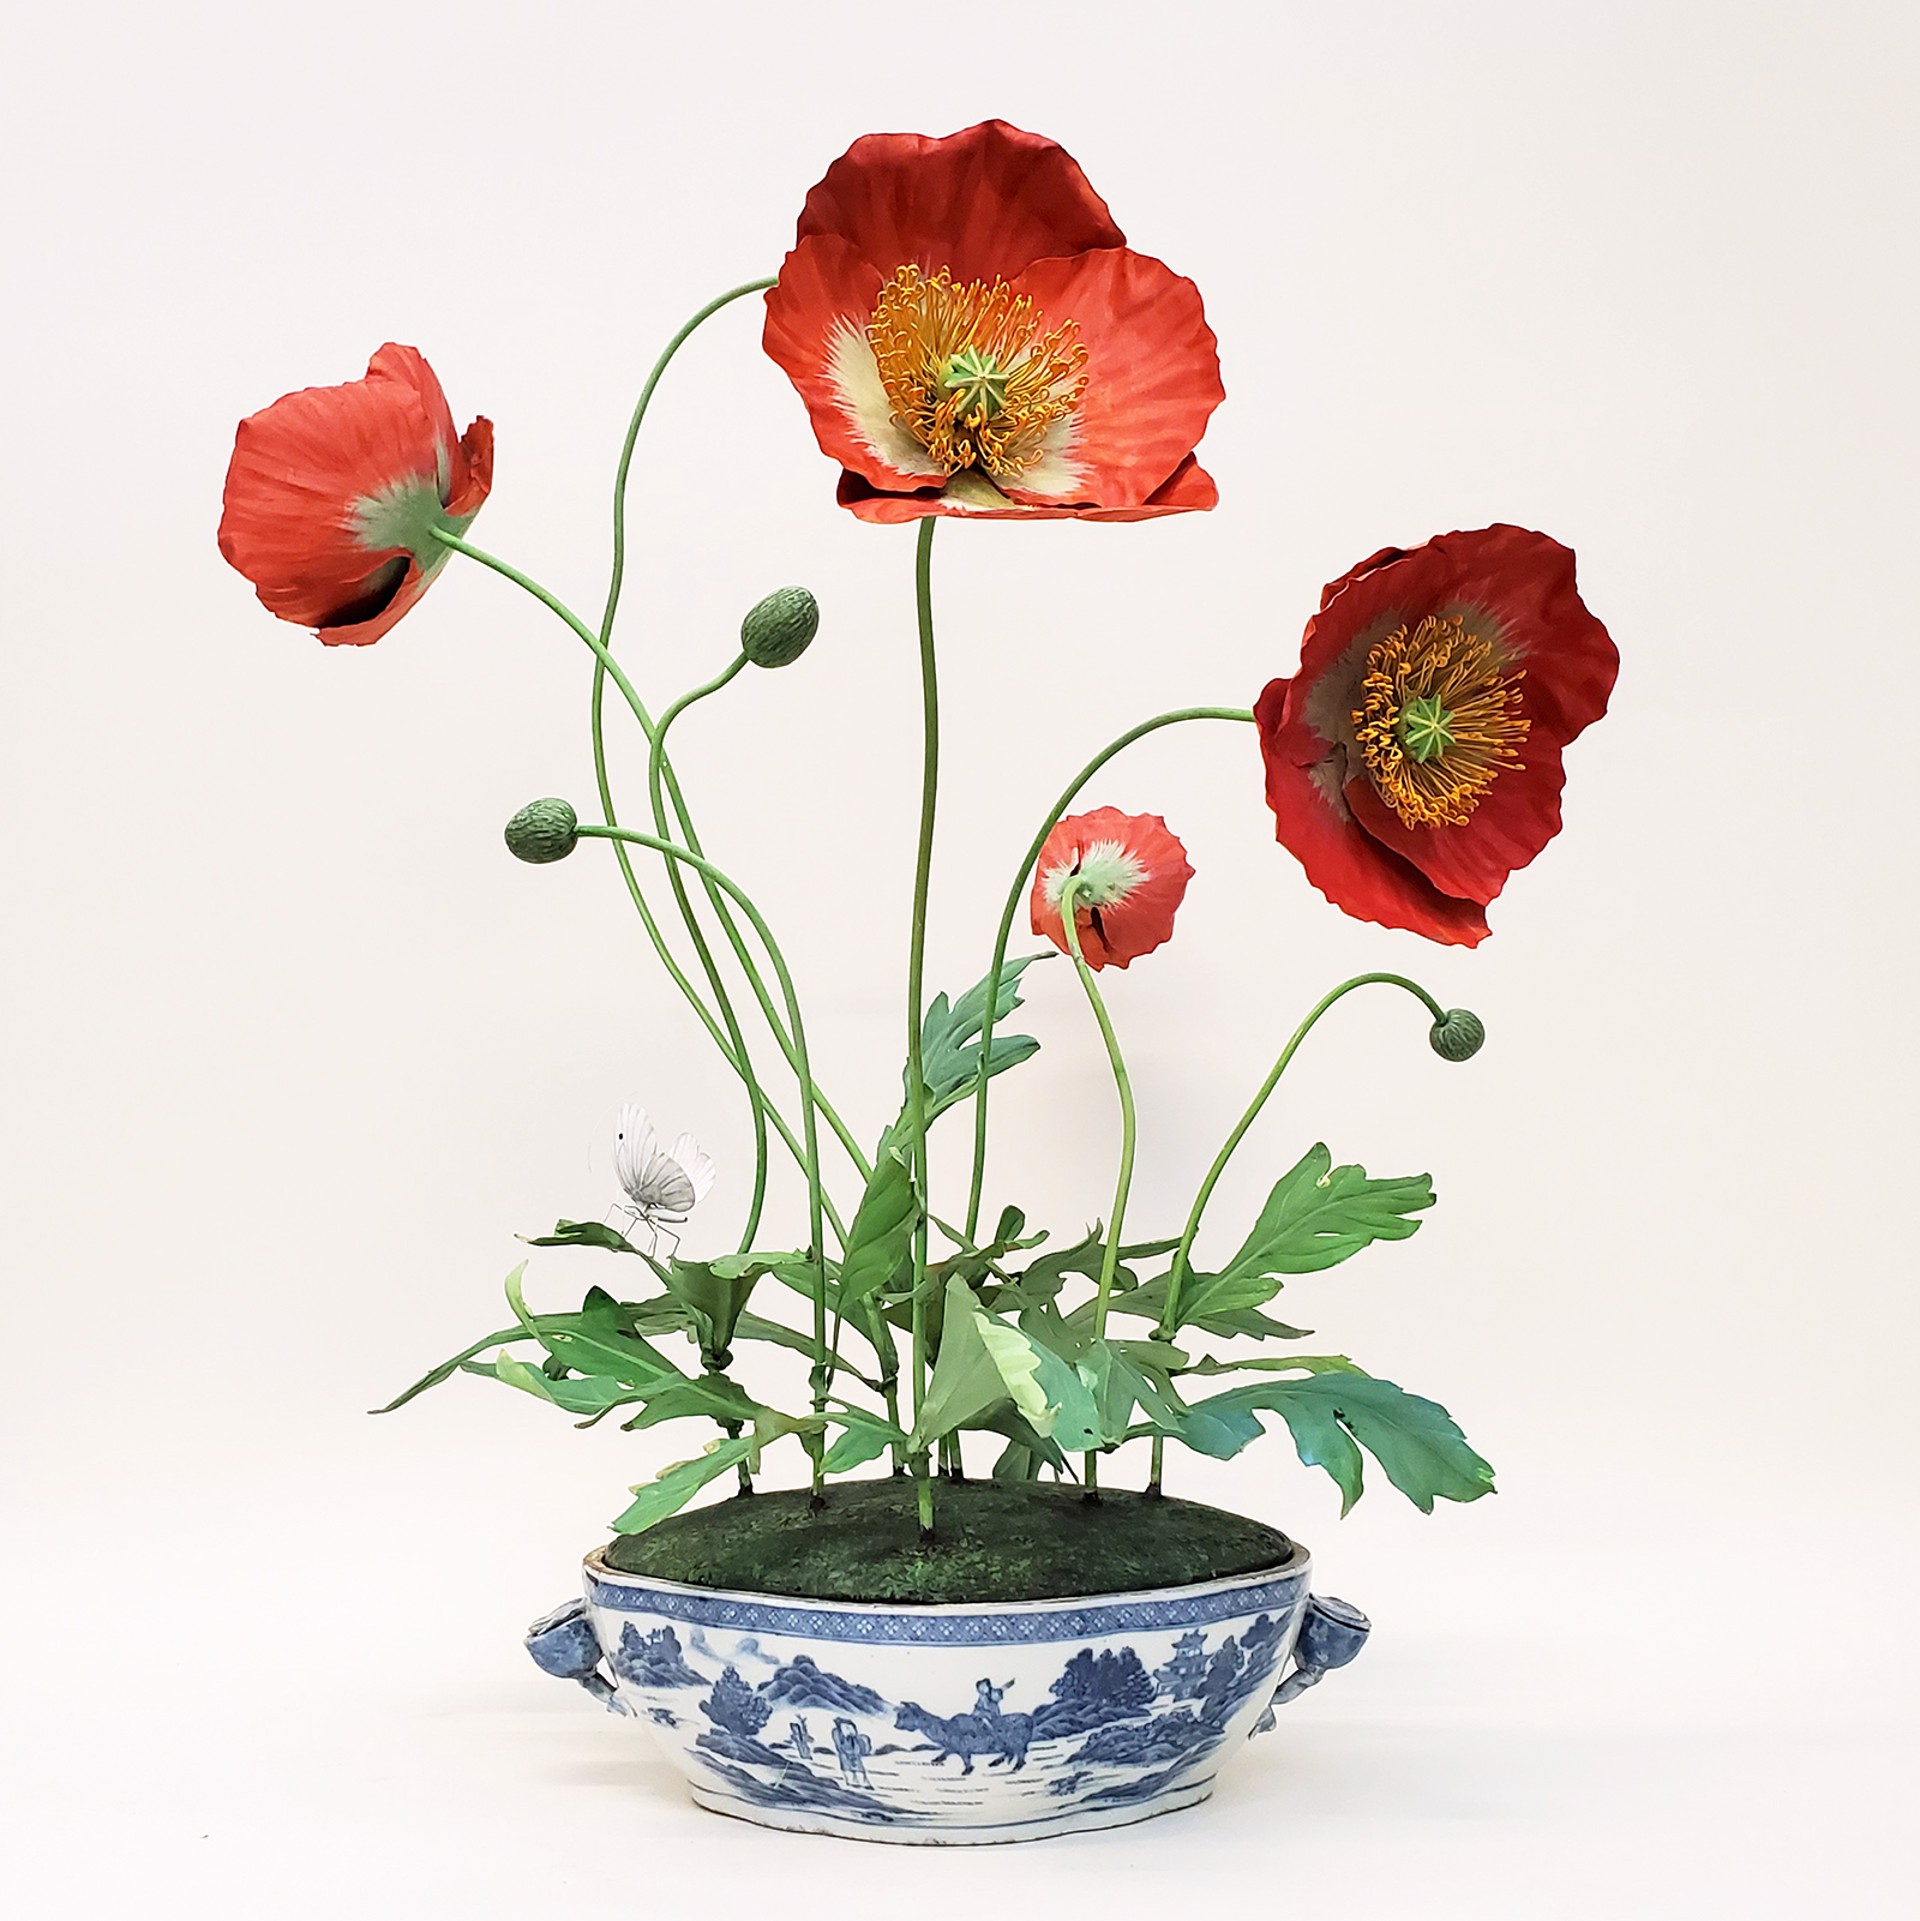 POPPY WITH ANTIQUE BLUE AND WHITE PORCELAIN POT by Carmen Almon